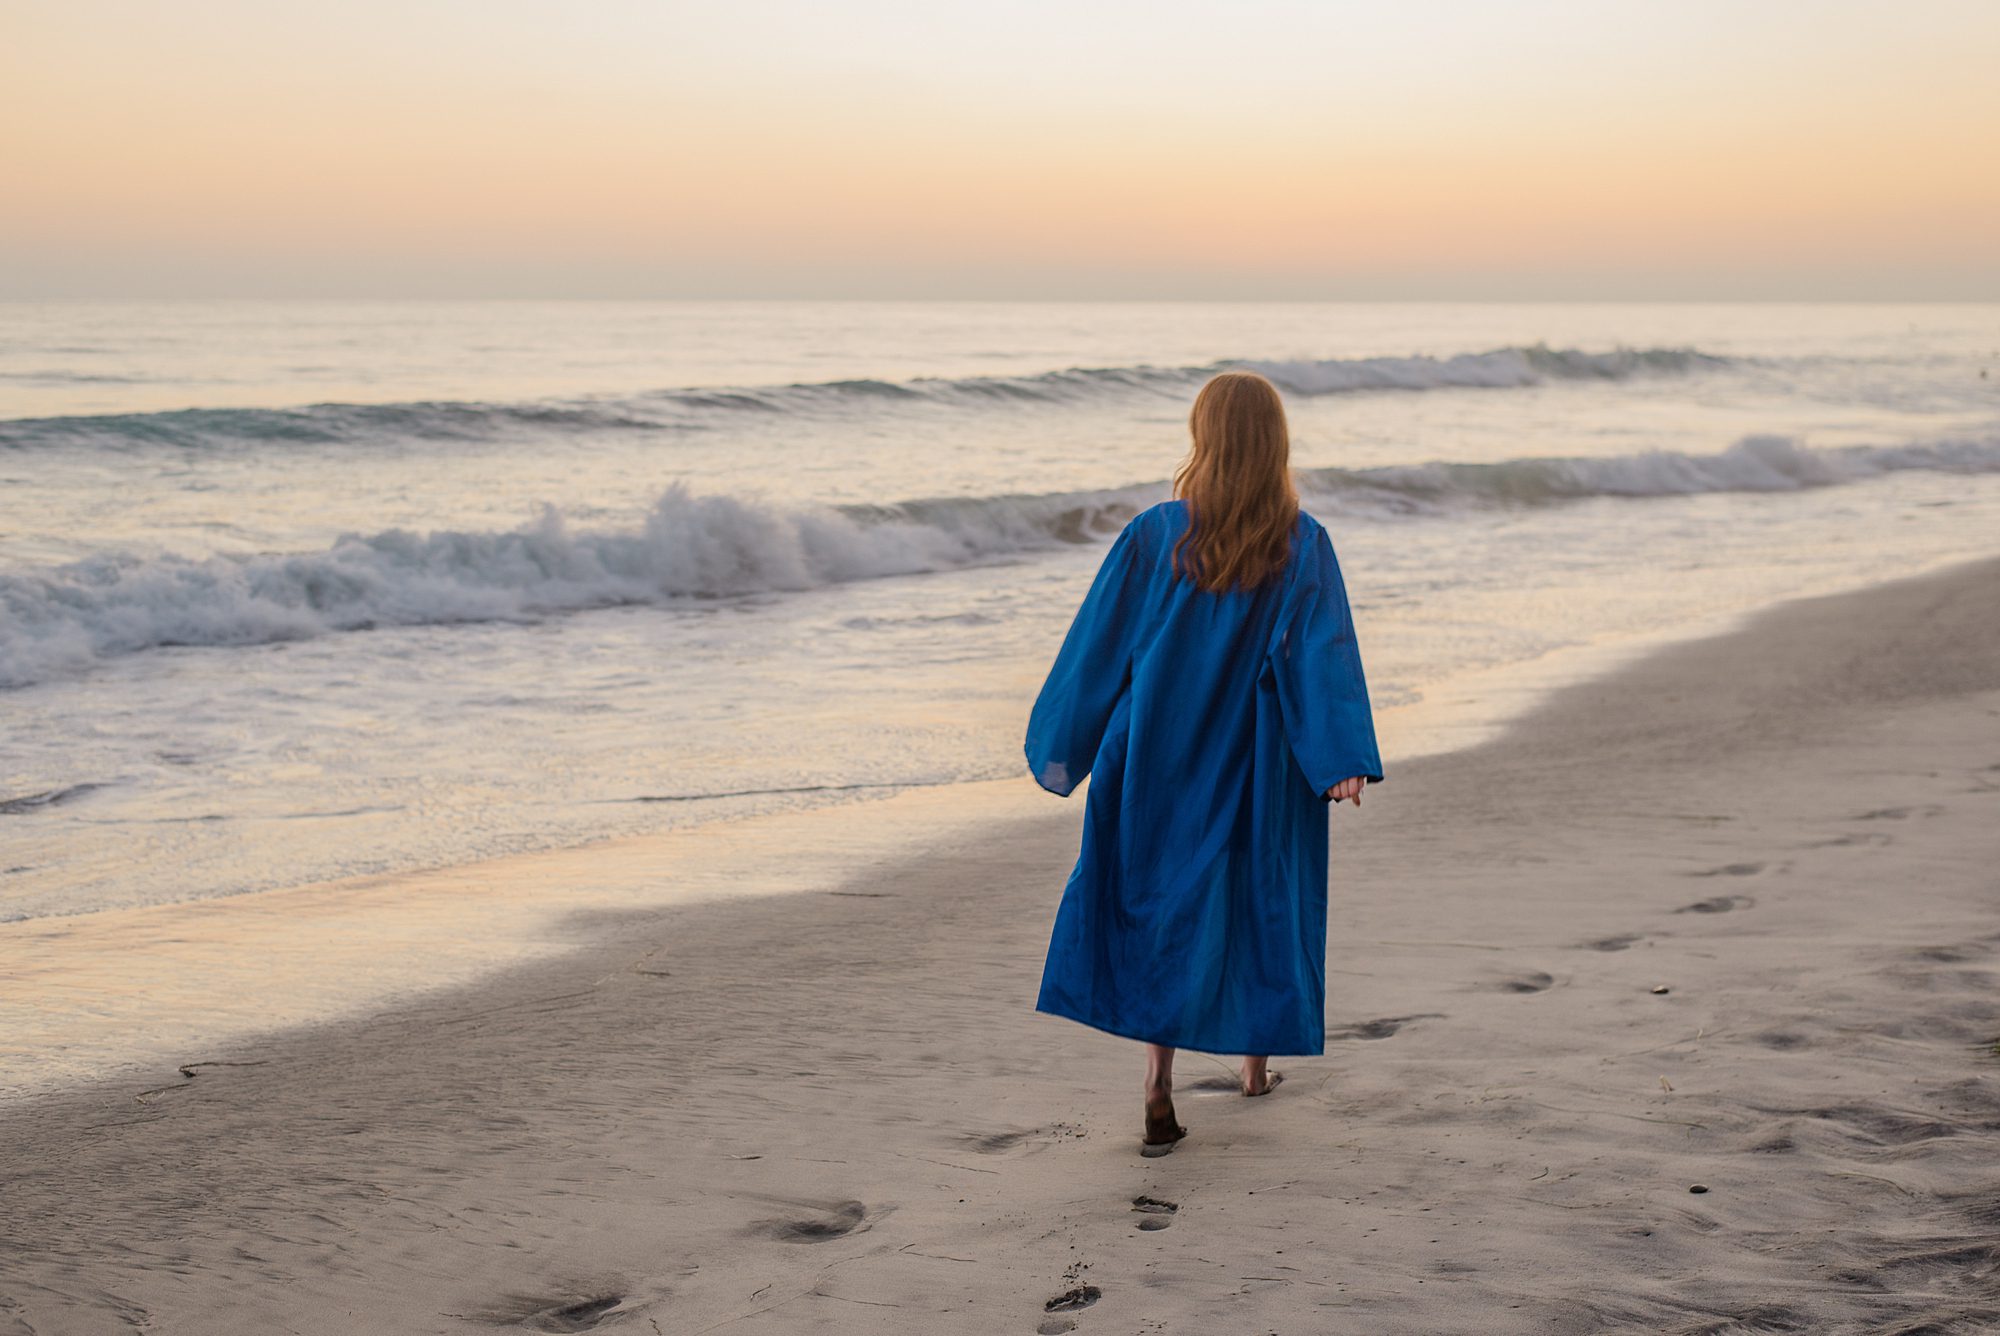 senior walks along the beach in cap and gown